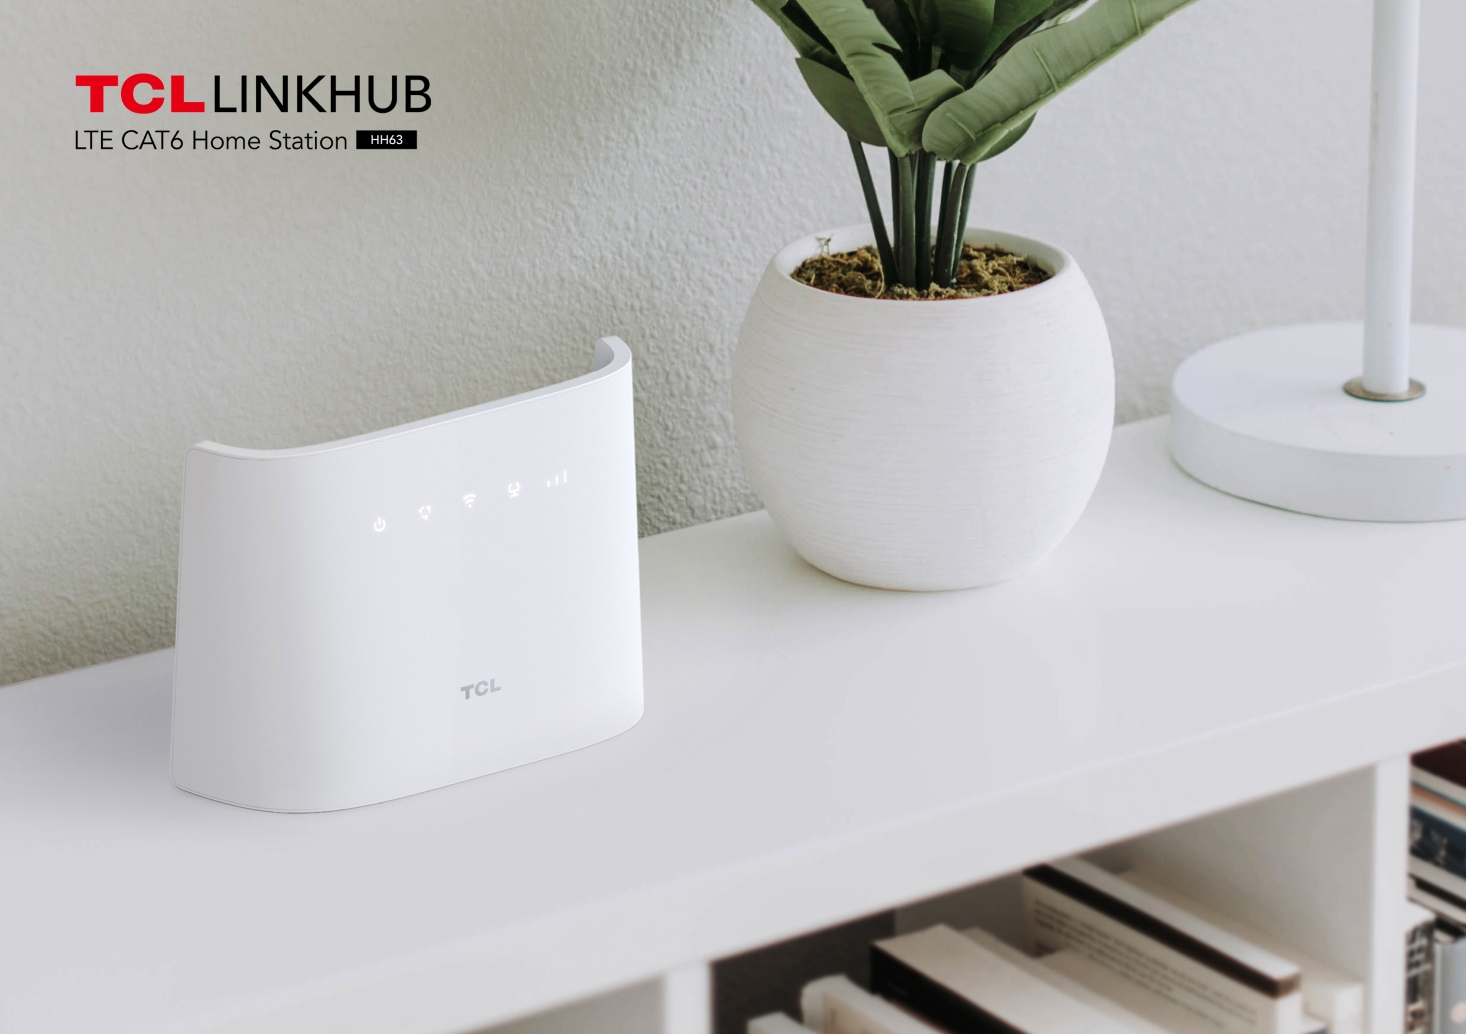 A Review Of The TCL LinkHub 5G Wi-Fi Router On Safaricom 5G In